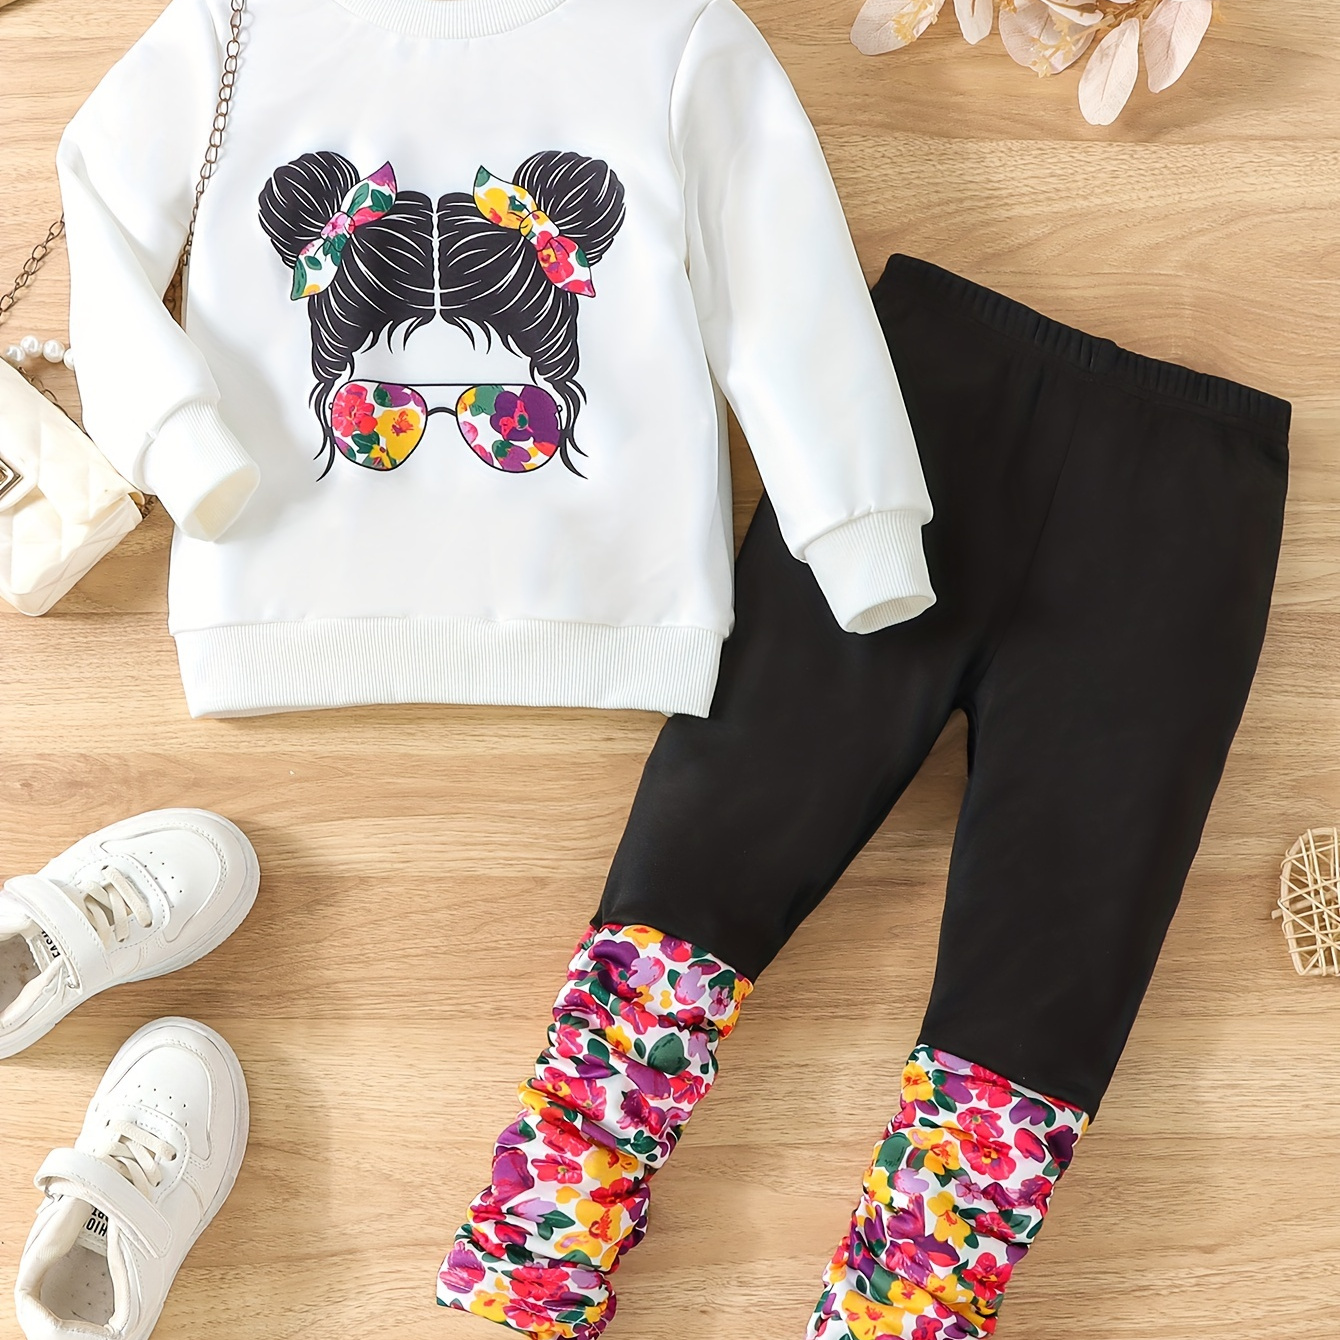 

Girl's Floral Pattern Outfit 2pcs, Portrait Graphic Sweatshirt & Pants Set, Kid's Clothes For Spring Fall